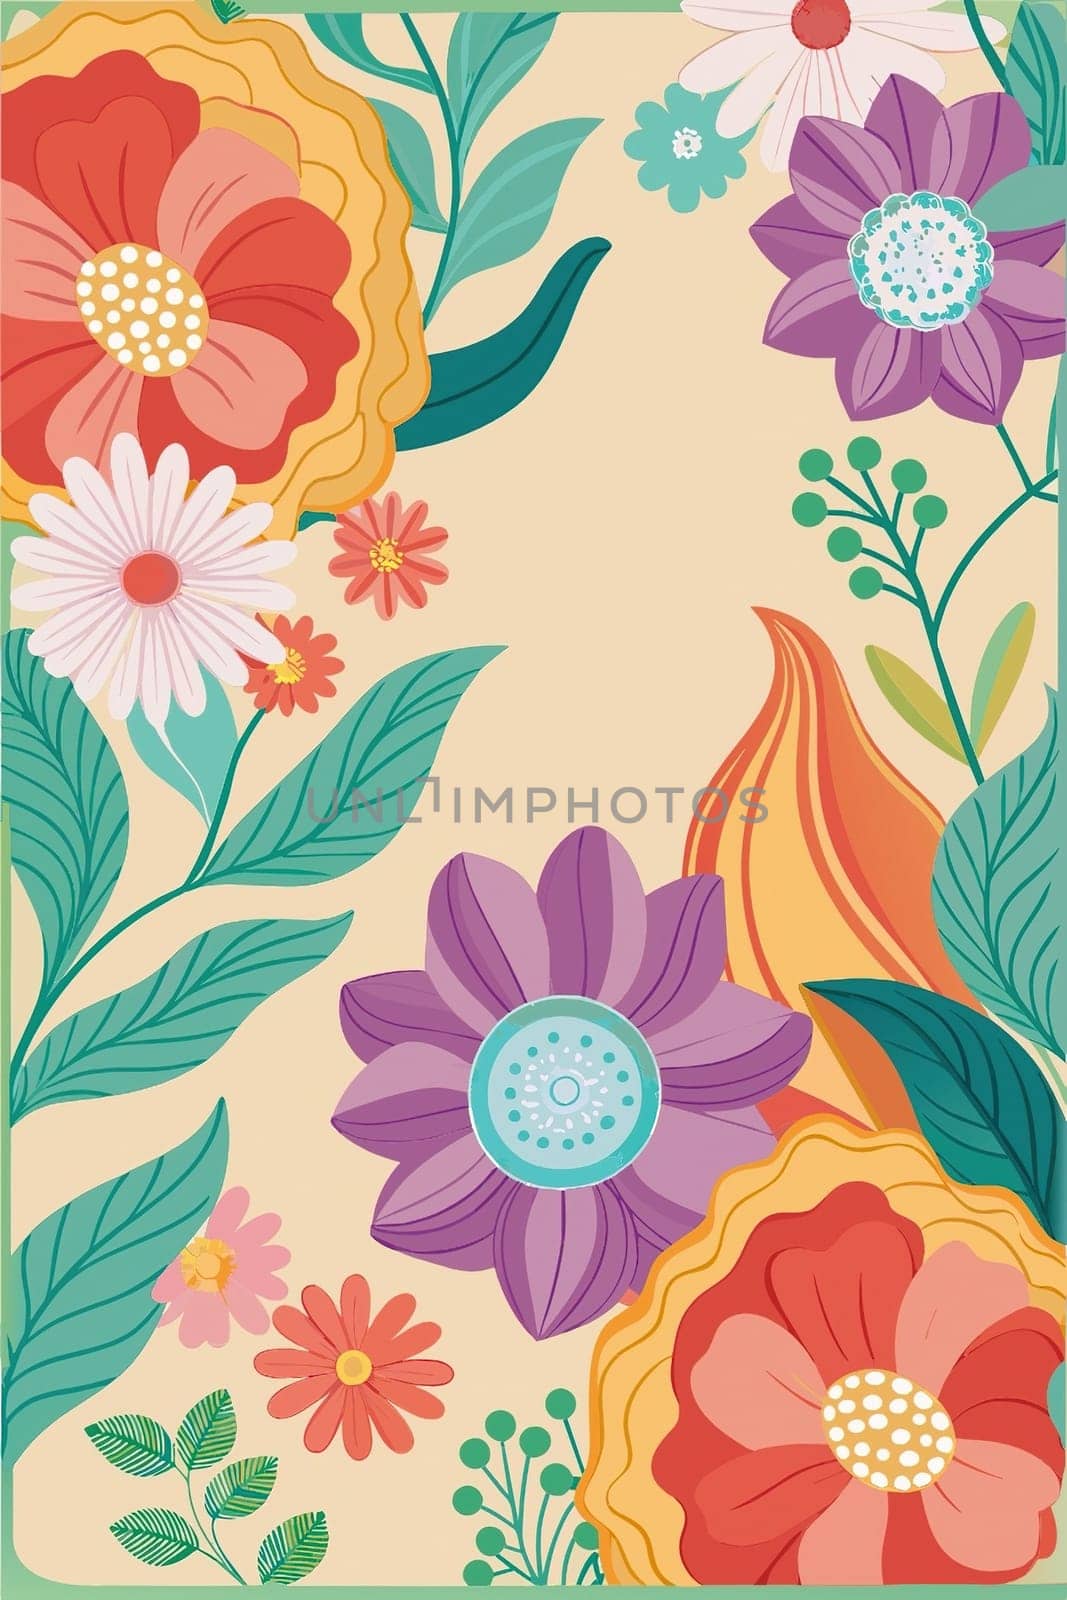 Floral seamless pattern with pink flowers and green leaves by yilmazsavaskandag